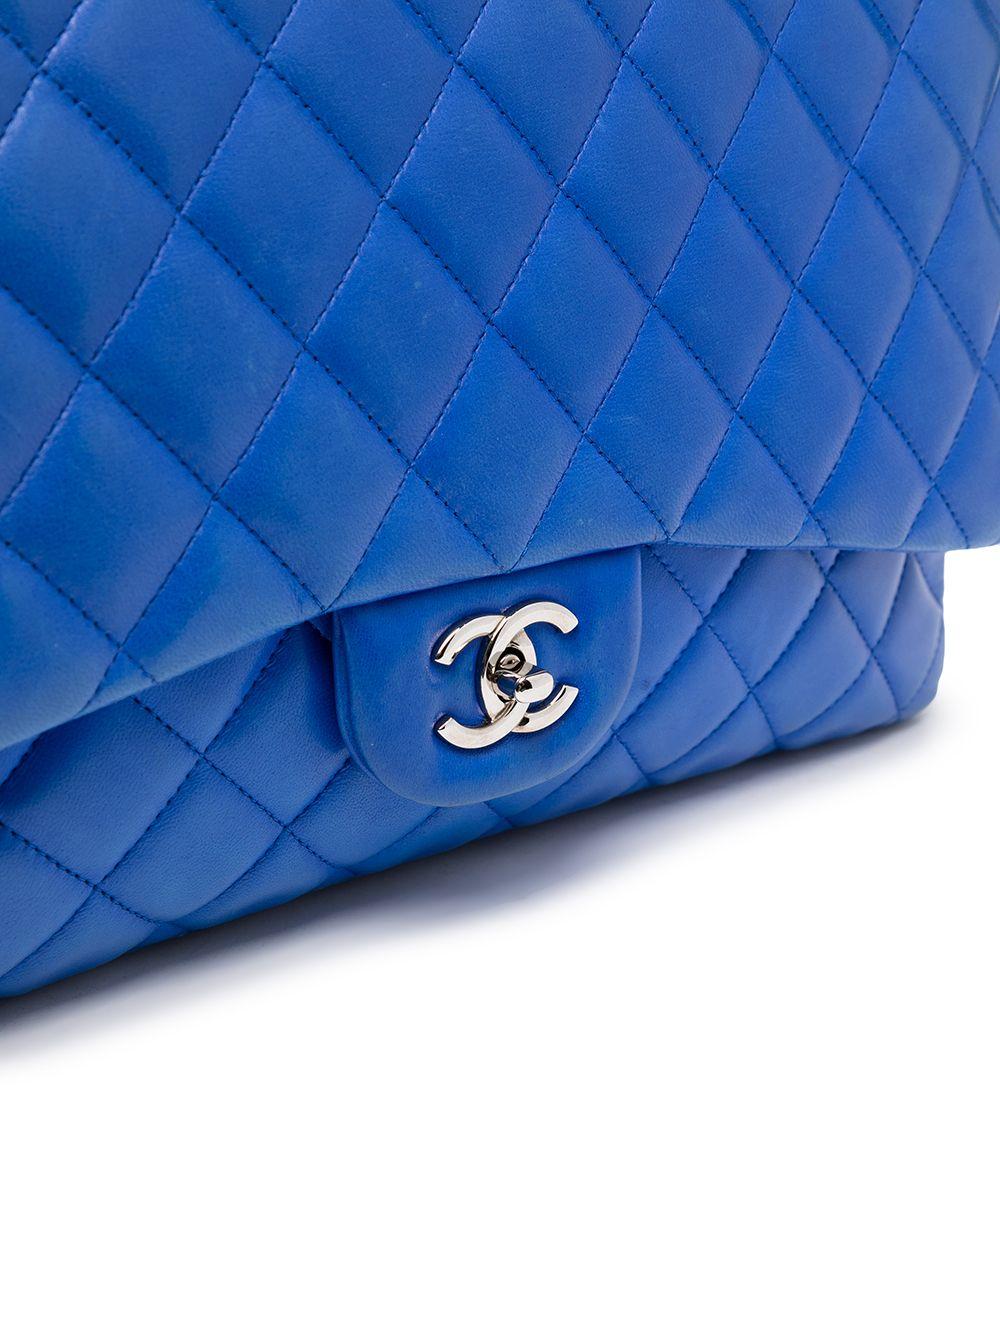 The perfect airport bag, store all your essentials , plus more in this vintage pre-owned blue lambskin maxi double flap, from 2009-2010. Featuring the classic Chanel diamond quilting and silver iconic 'CC' logo, the turn-lock closure opens to reveal